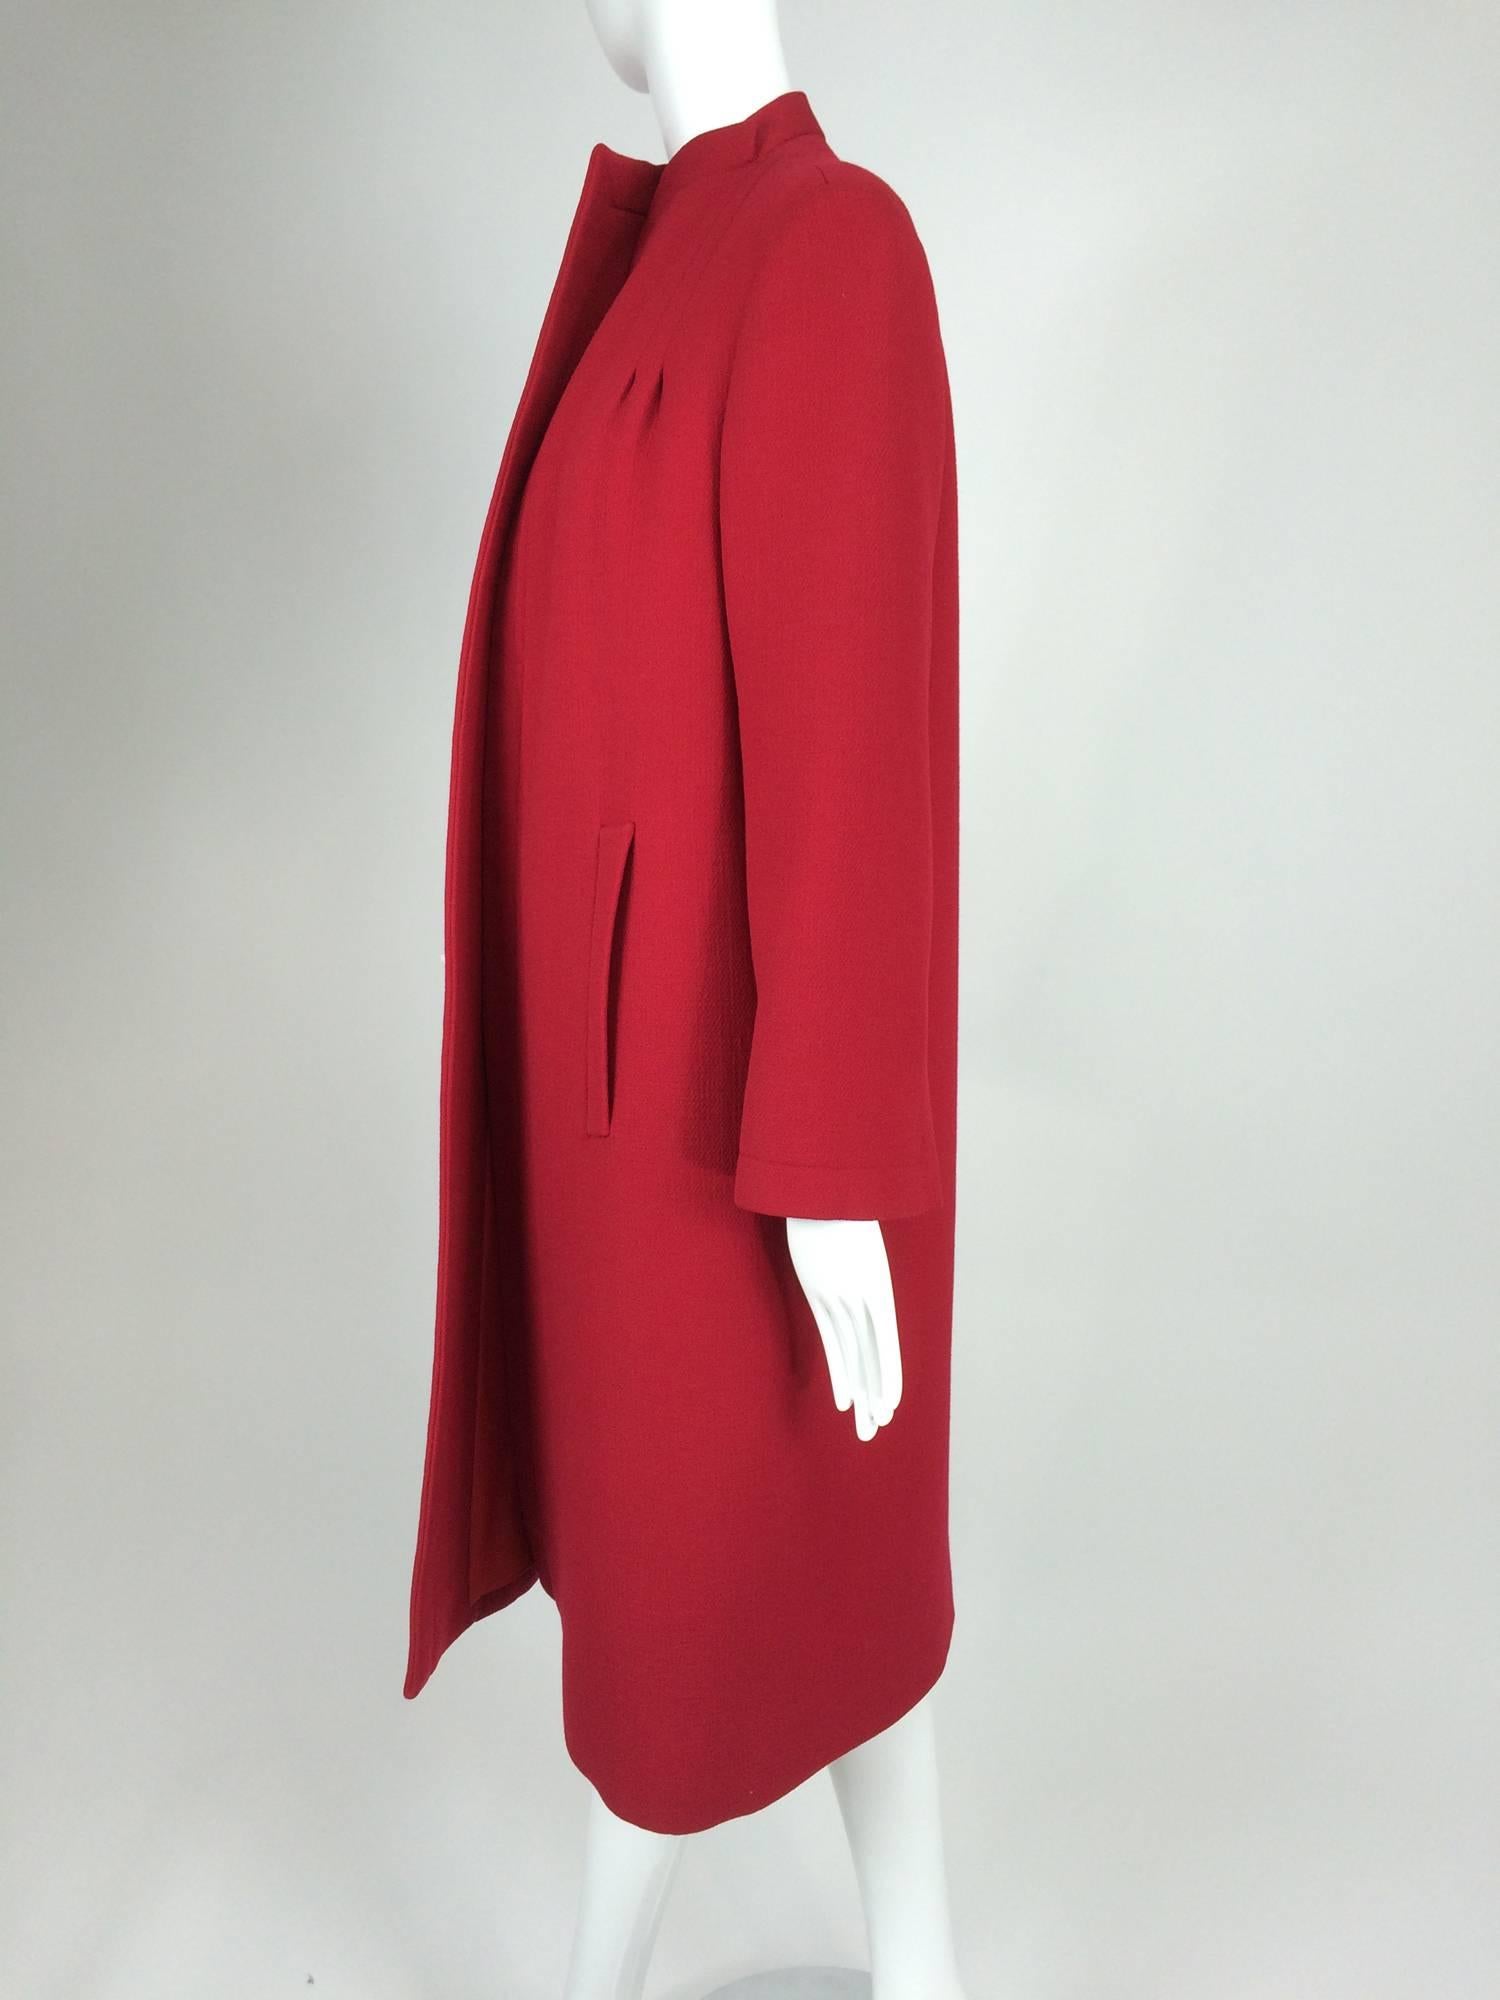 Pauline Trigere chic red wool open front coat 1950s...Beautiful cherry red wool coat from the 1950s by Pauline Trigere...Open front coat has a stand up collar, double open pleats at each shoulder front, vertical banded hip front pockets...Long